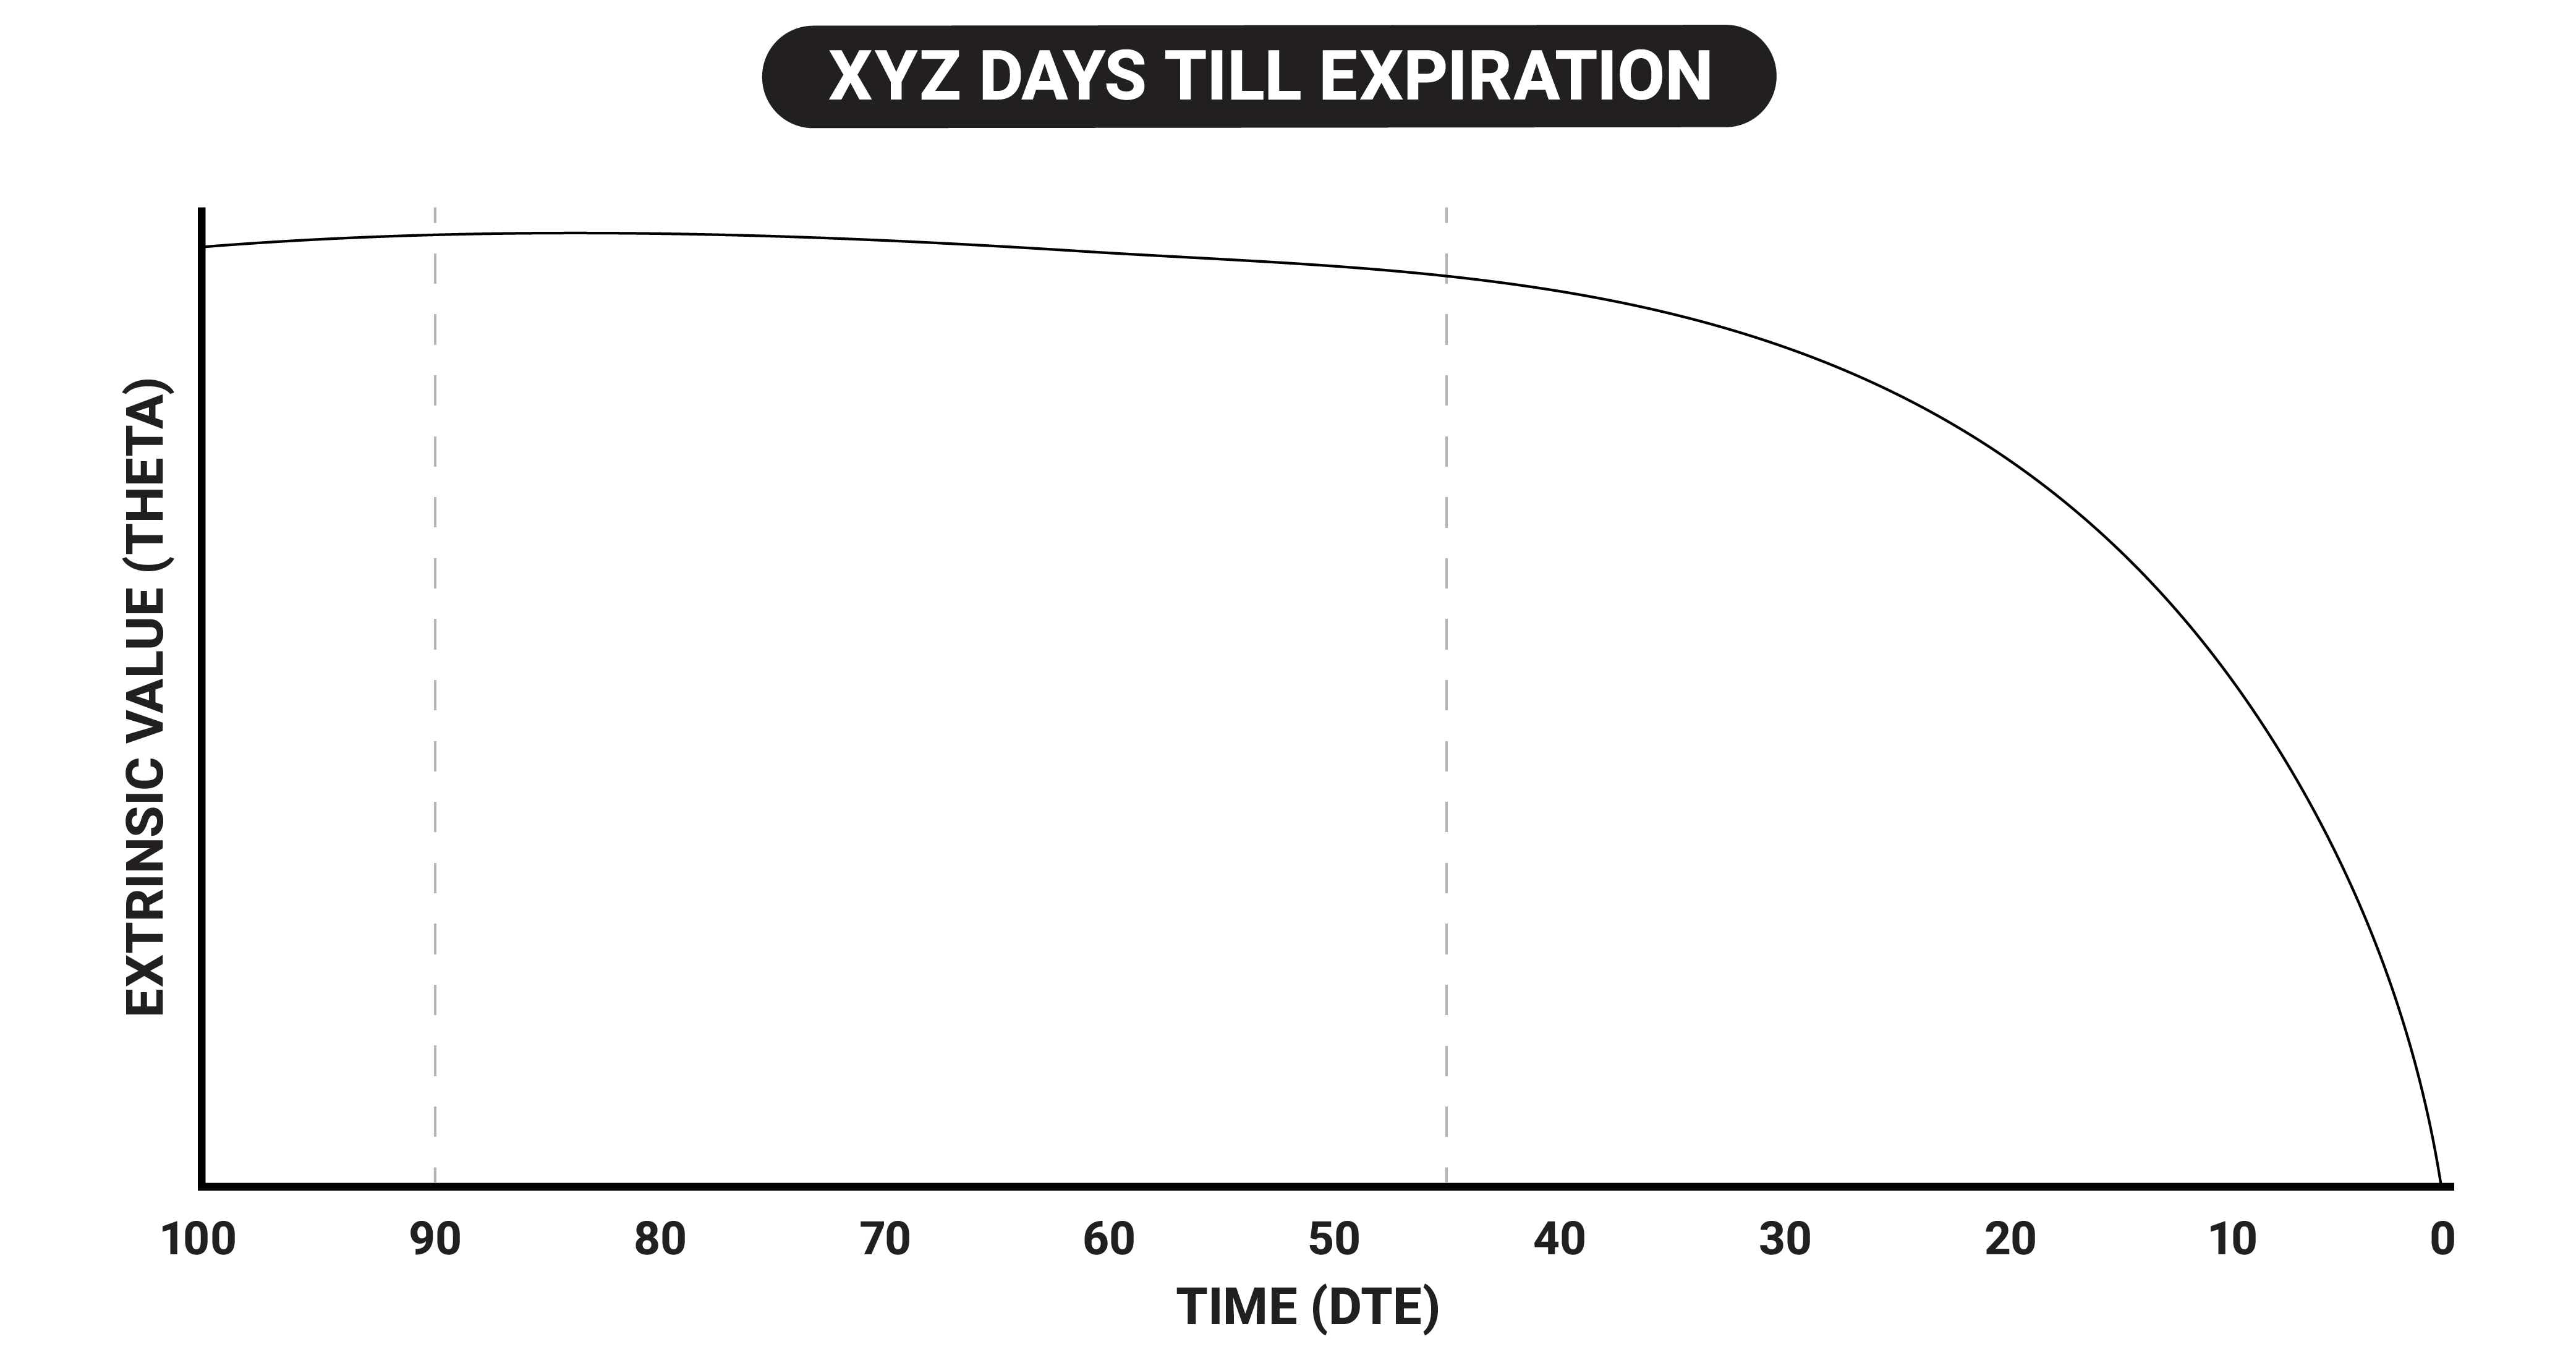 Company's days till expiration shown in a chart